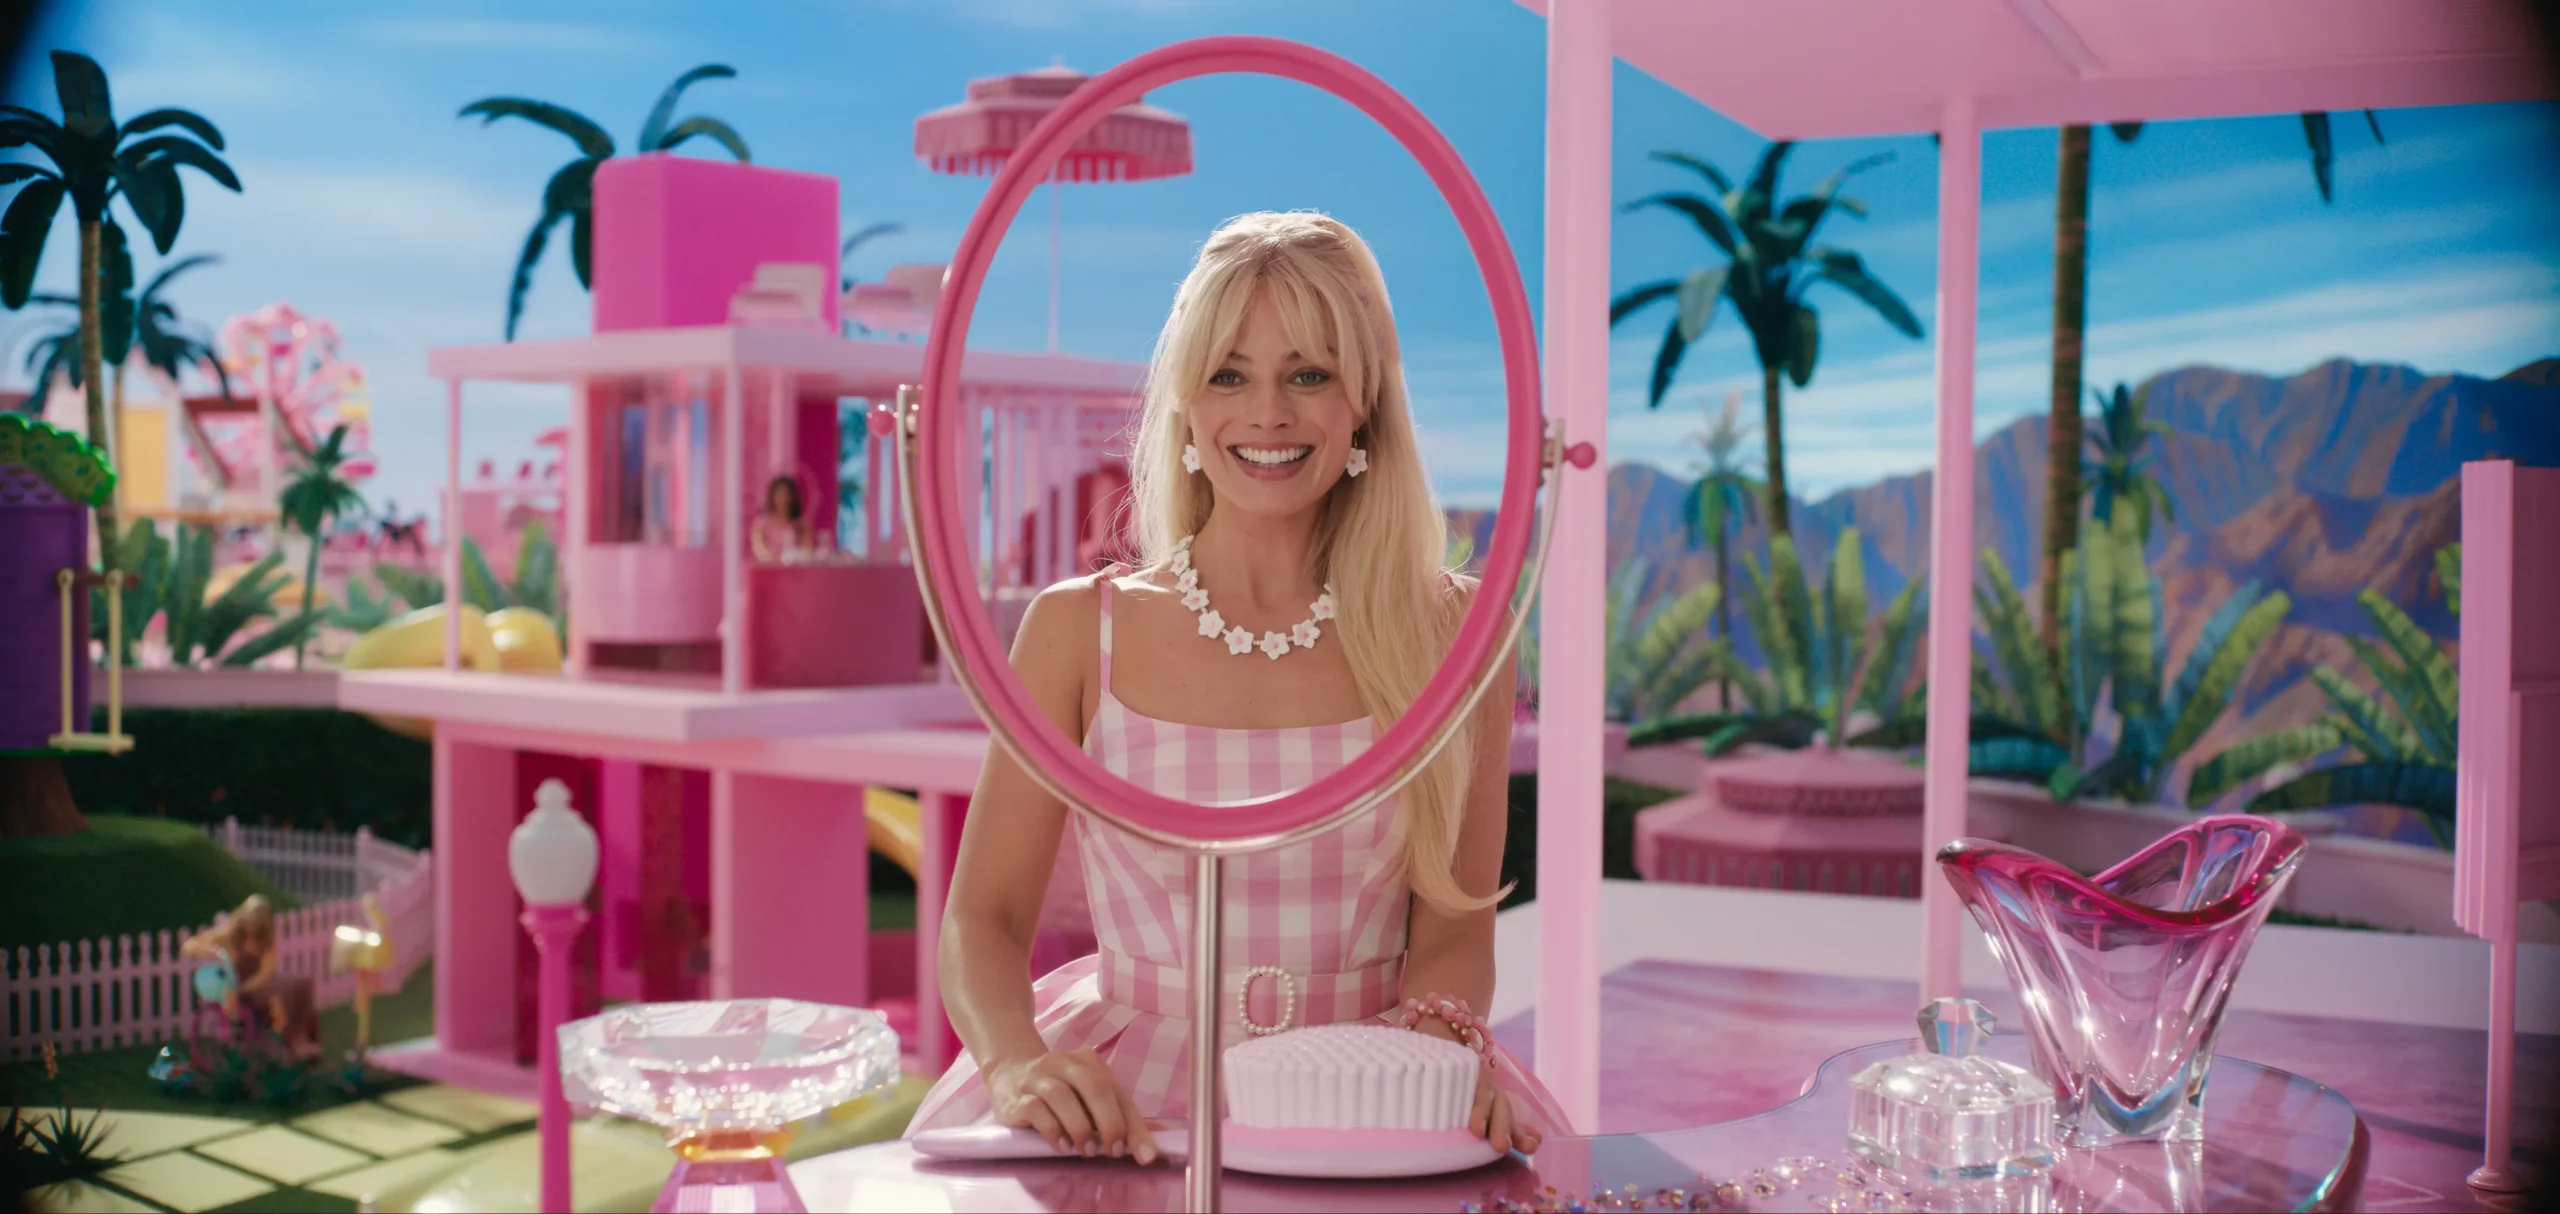 Barbie toy sales shoot up 25% after film’s release